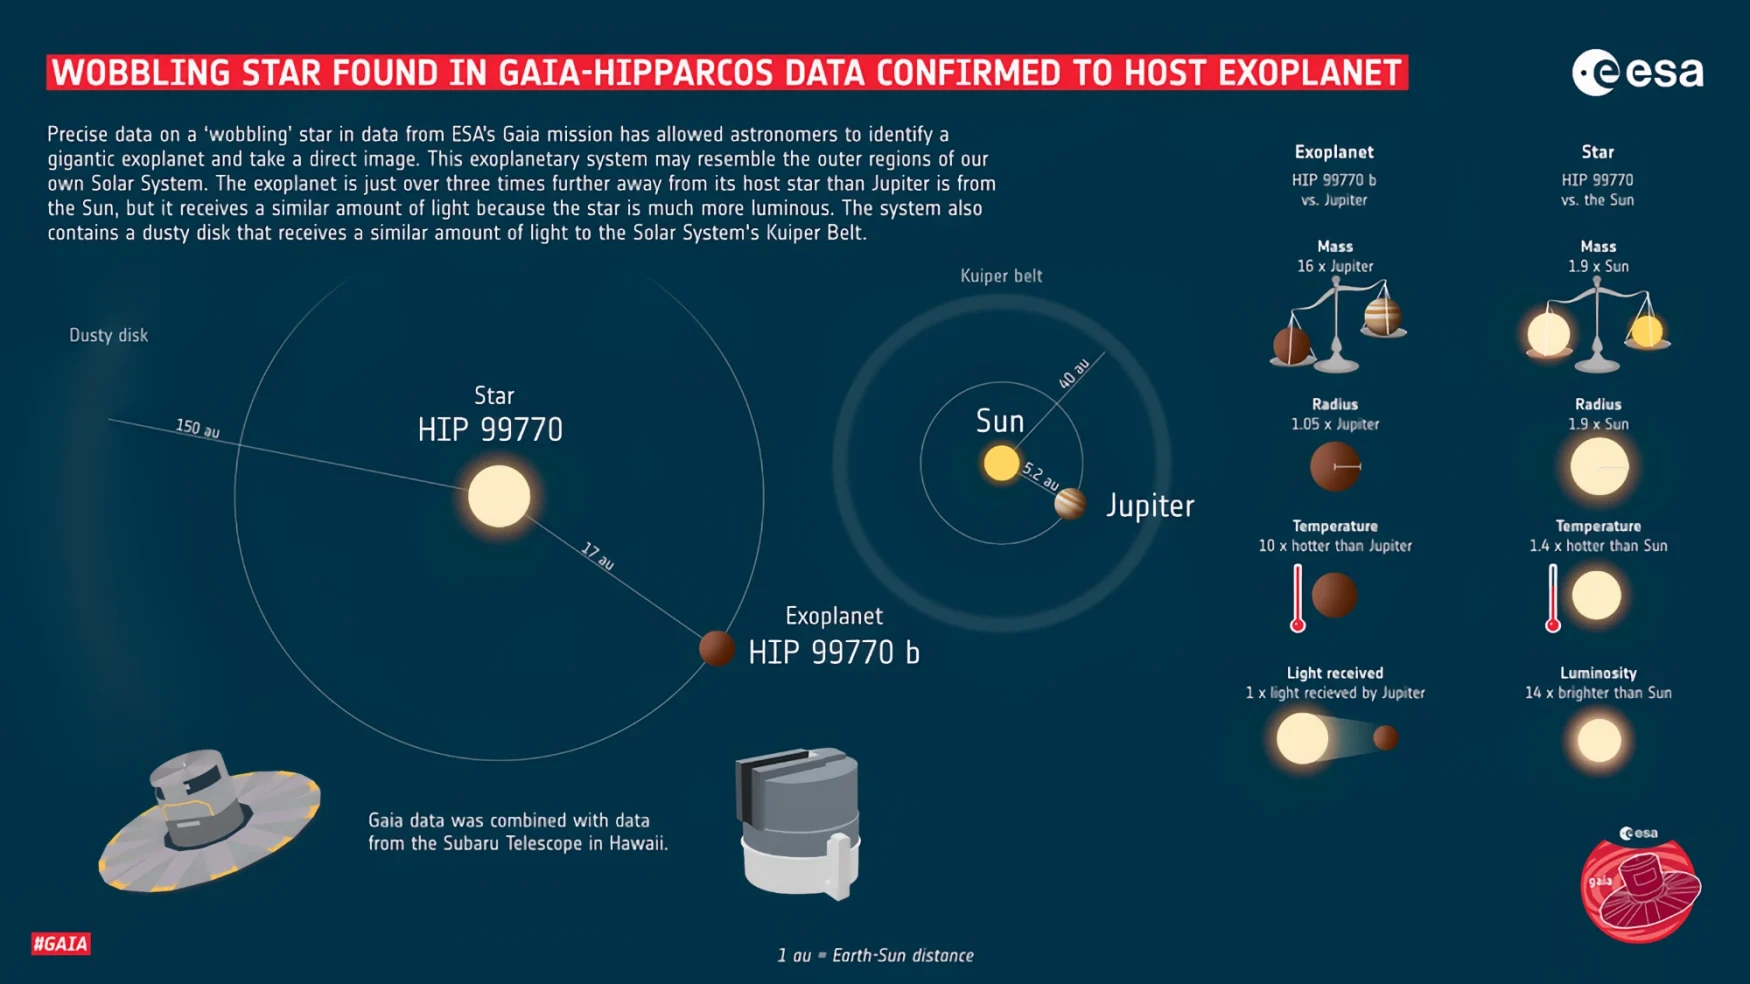 ESA illustration of the newly discovered HIP 99770 b, orbiting the star HIP 99770. It shows that the exoplanet's orbit around its sun is about three times longer than Jupiter's around our Sun.